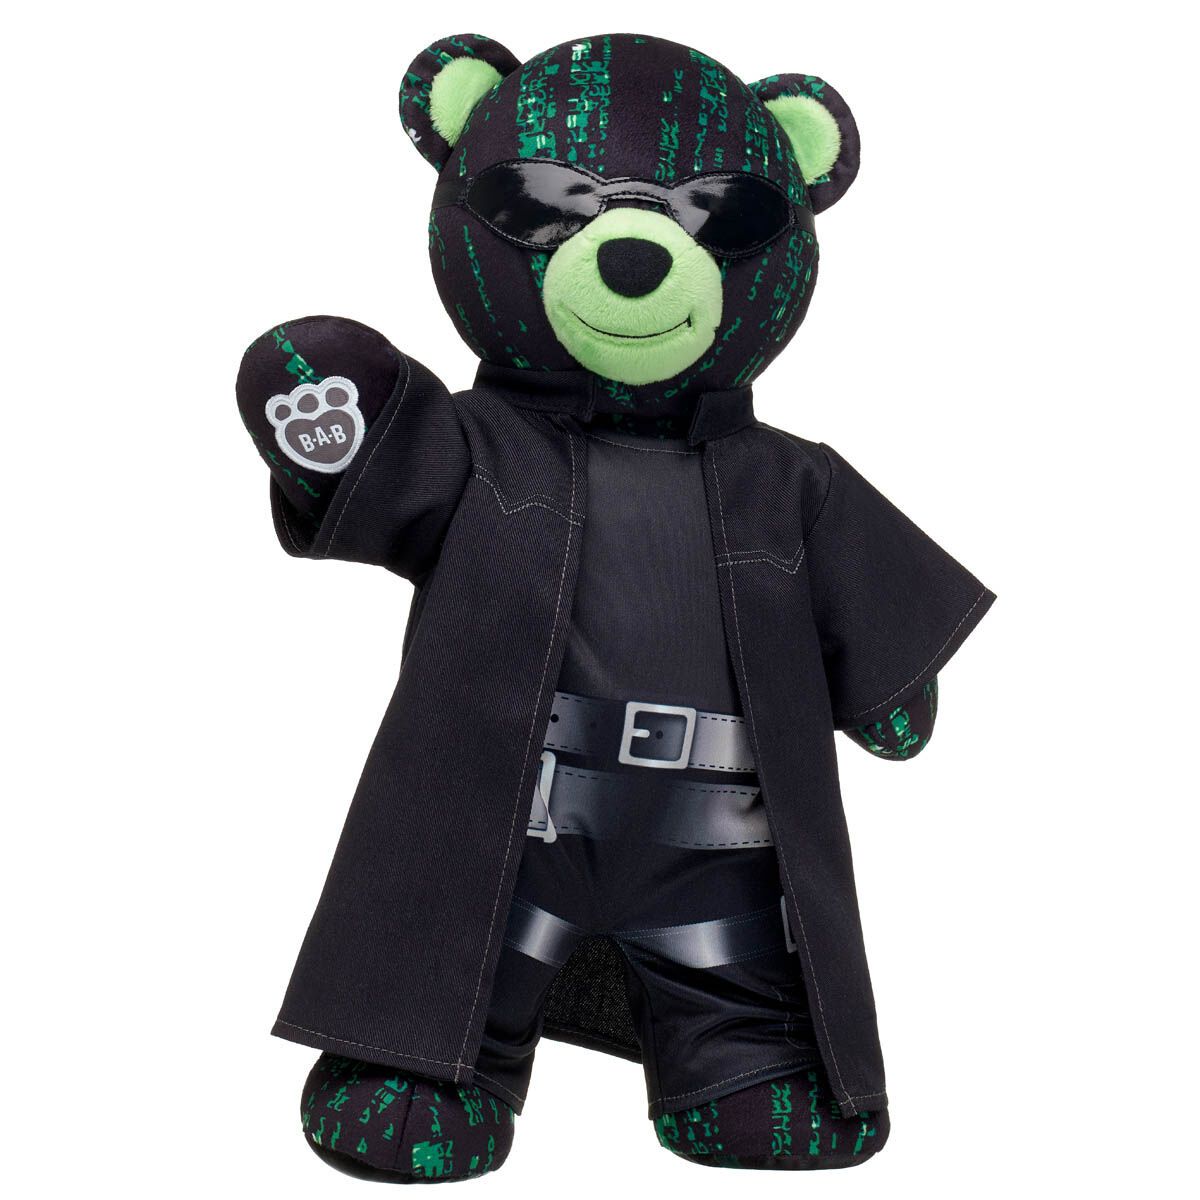 Neo Becomes a BuildABear With MatrixThemed Plush